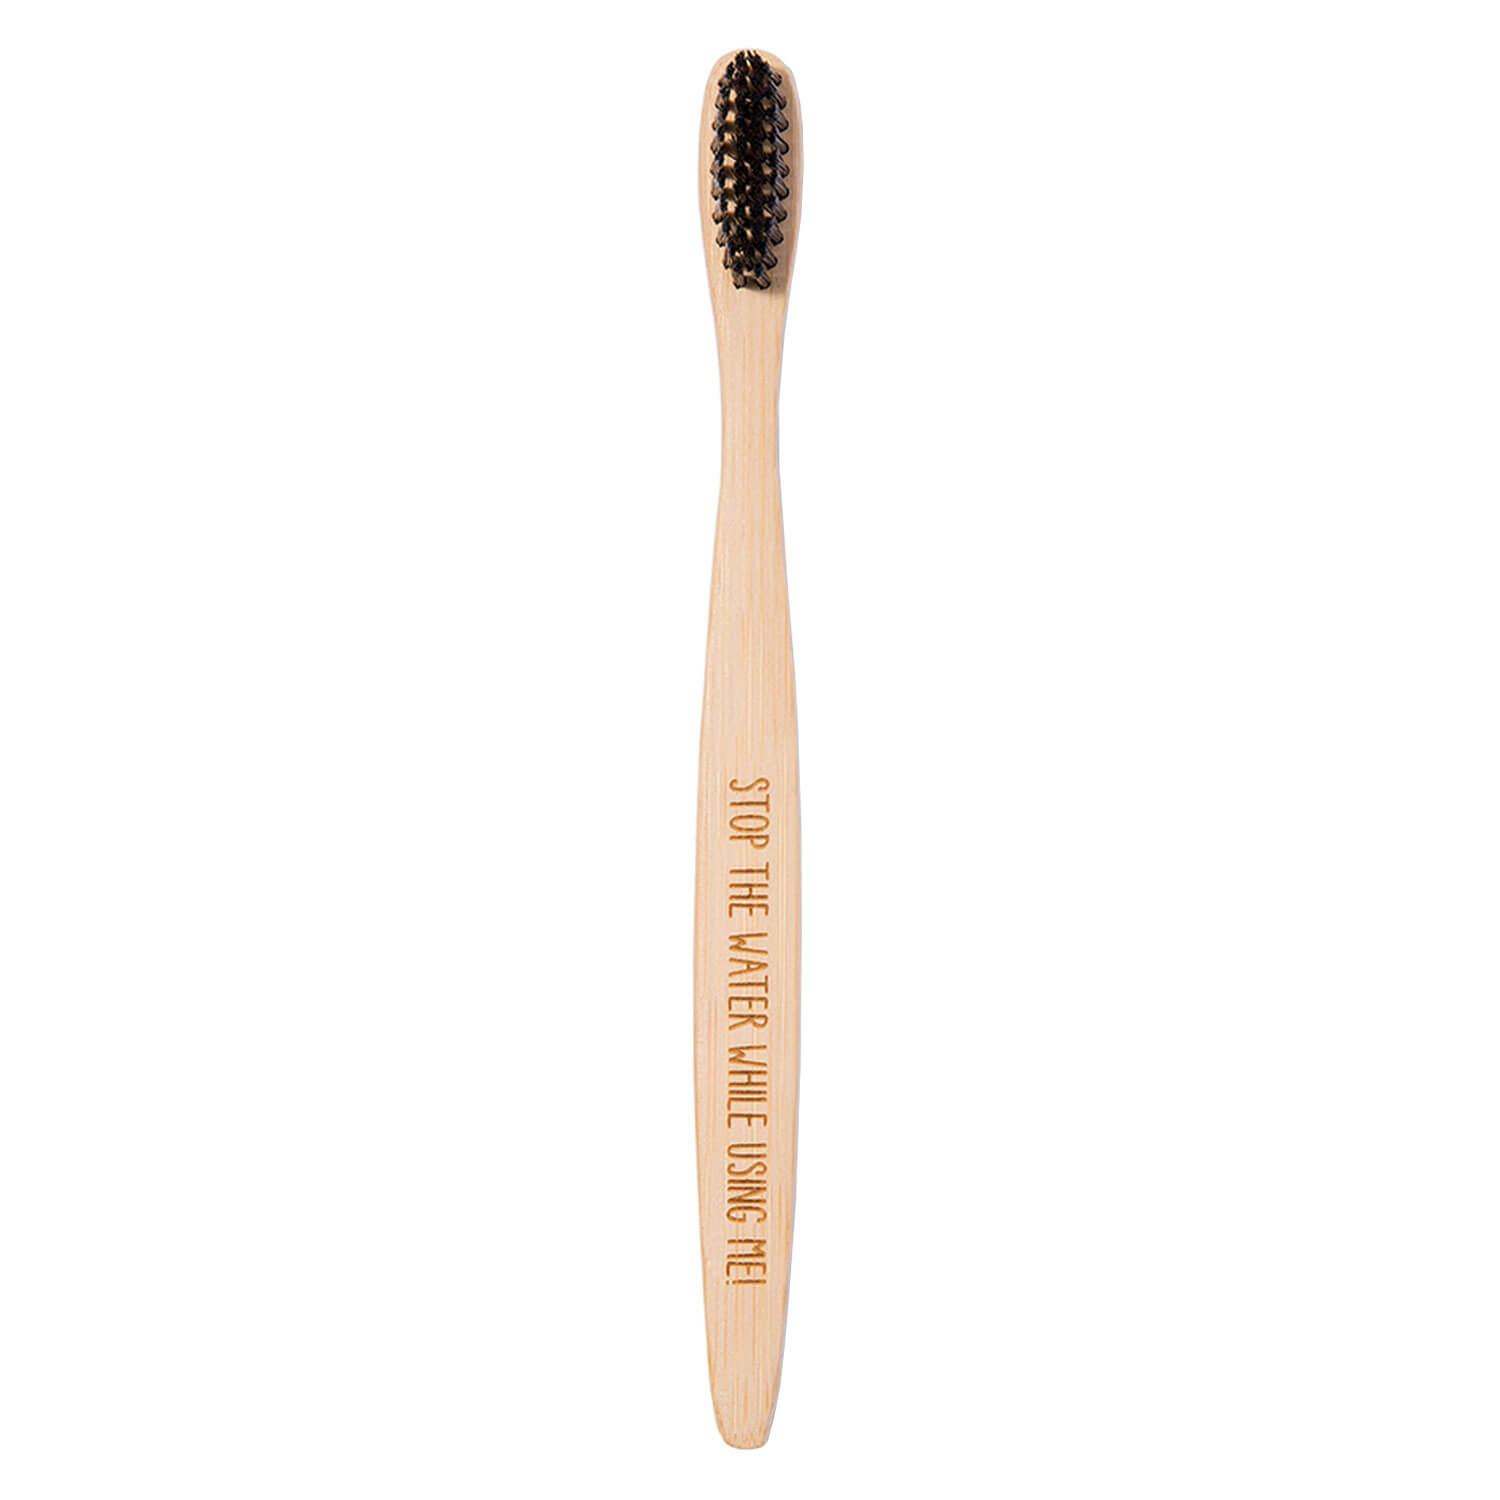 All Natural Smile - Wooden Bamboo Tooth Brush